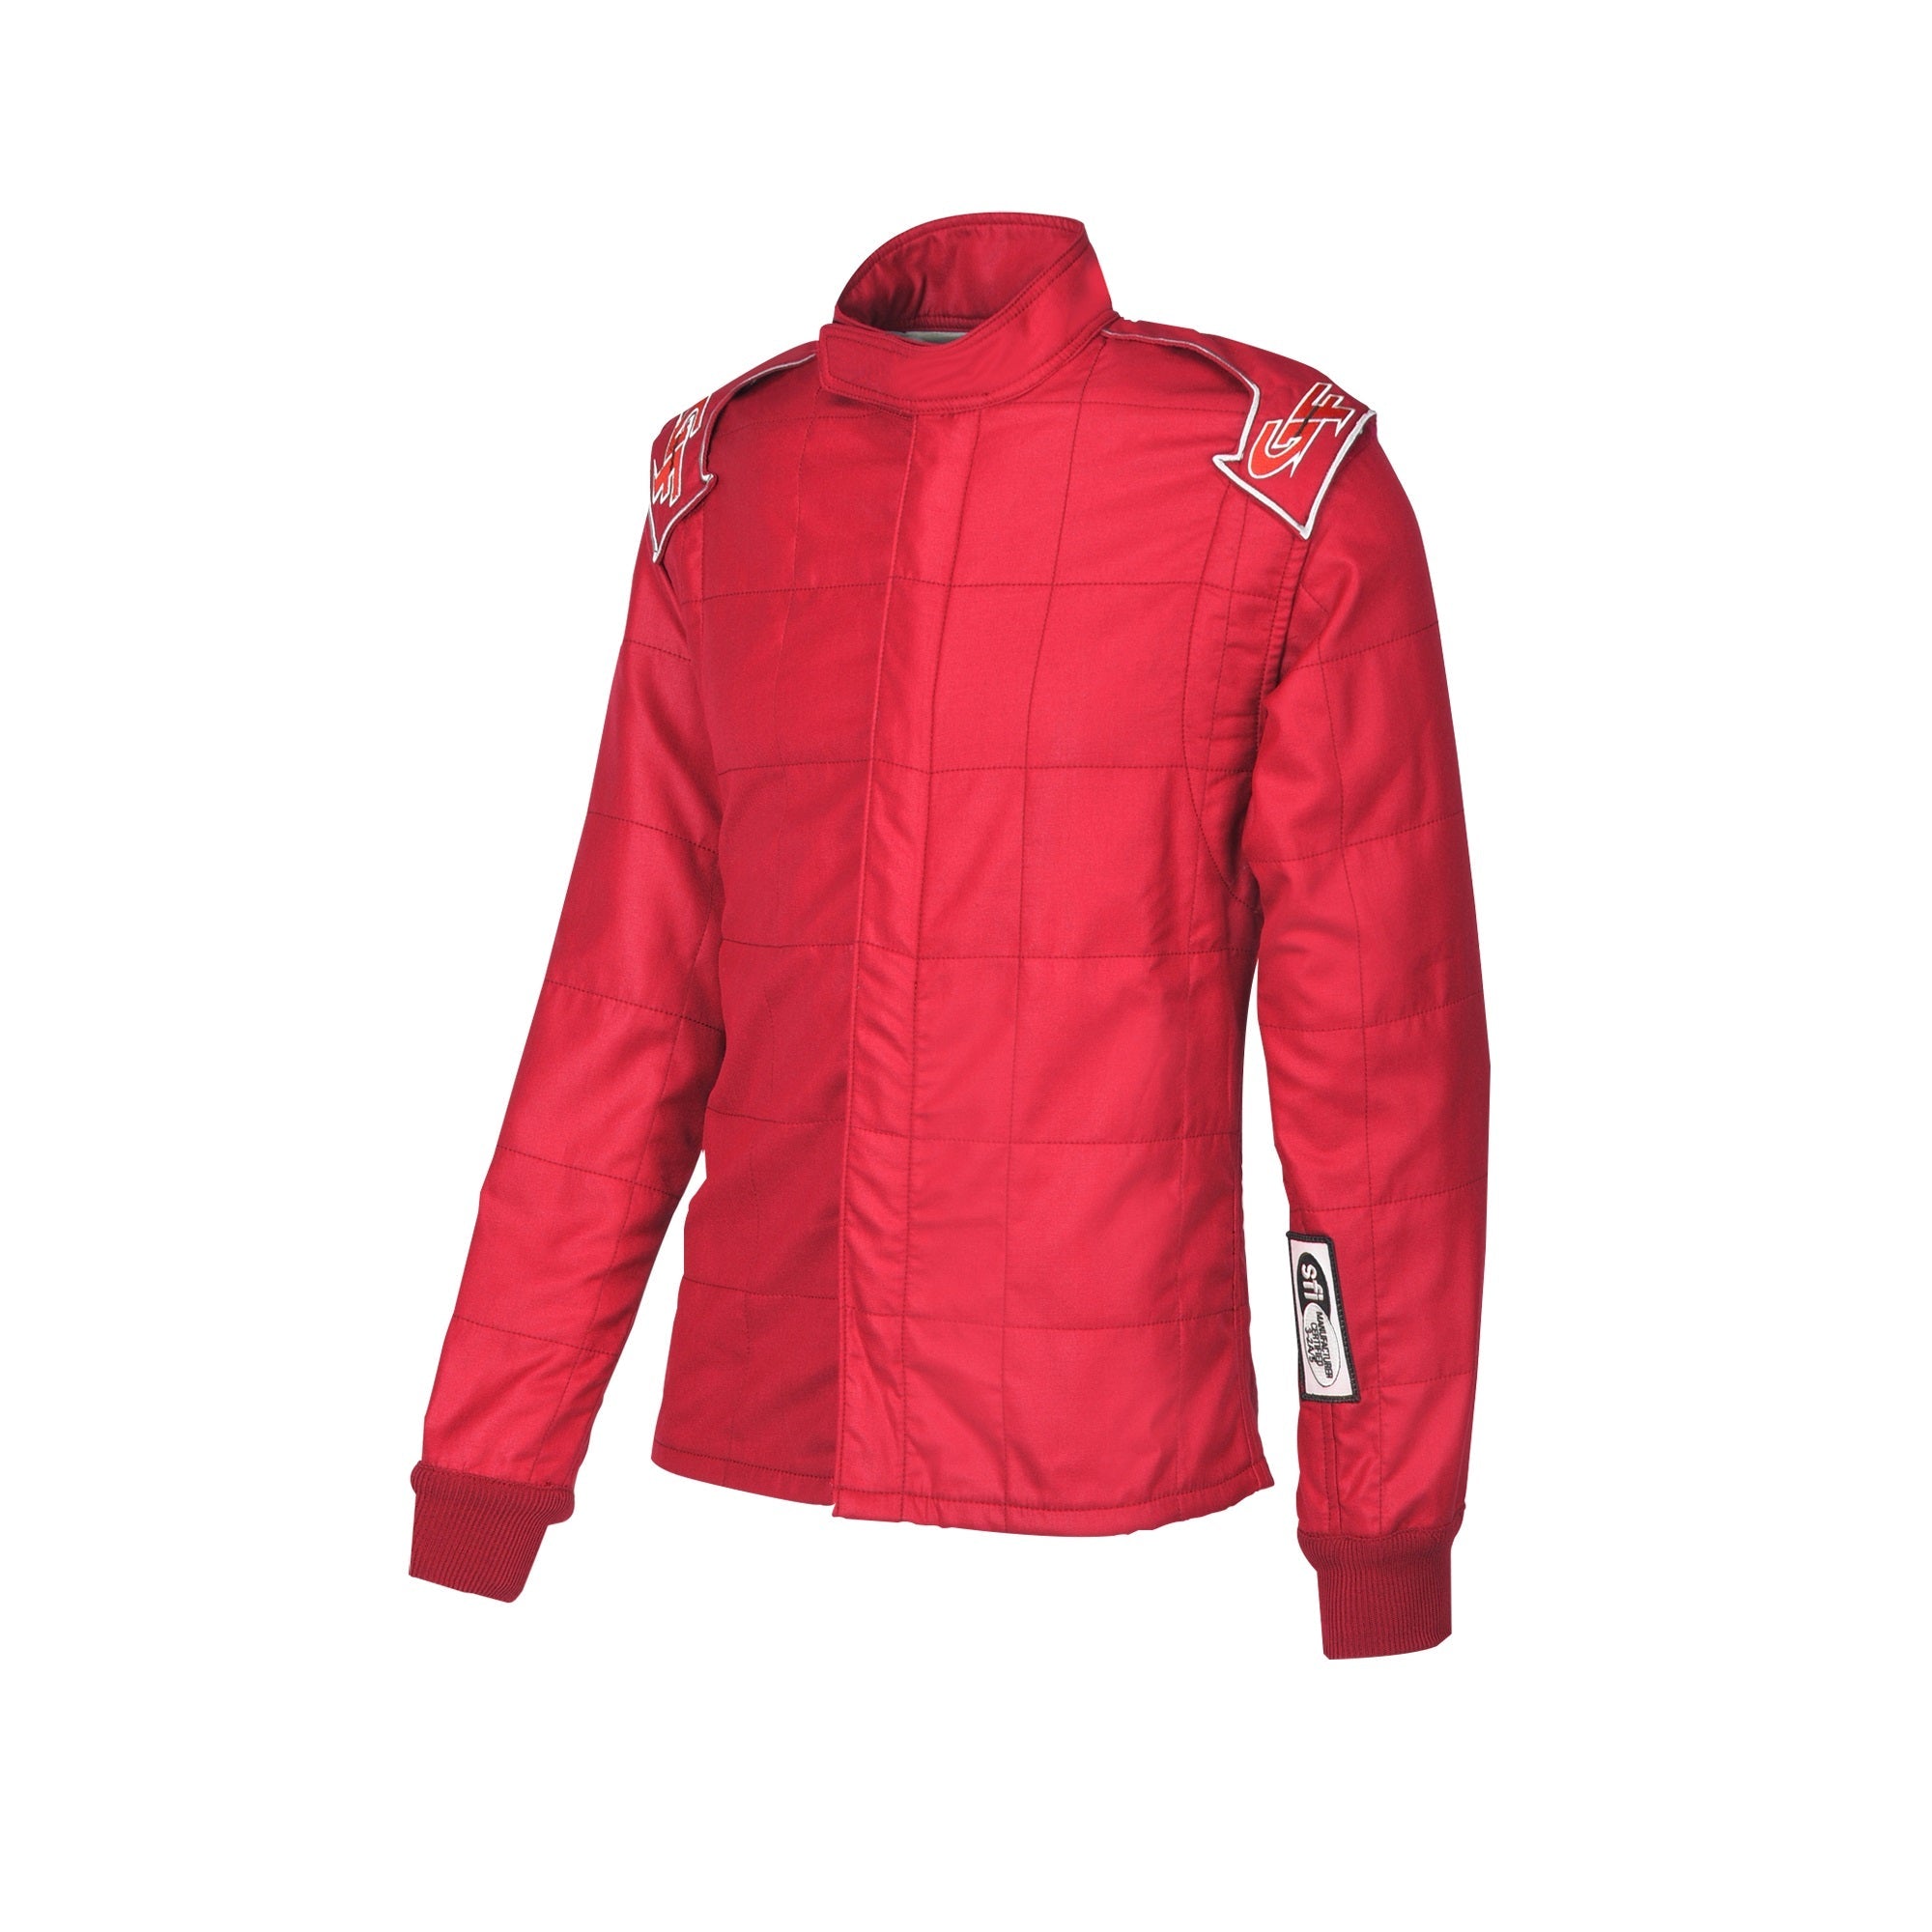 G-Force G-Limit Suit – Winding Road Racing